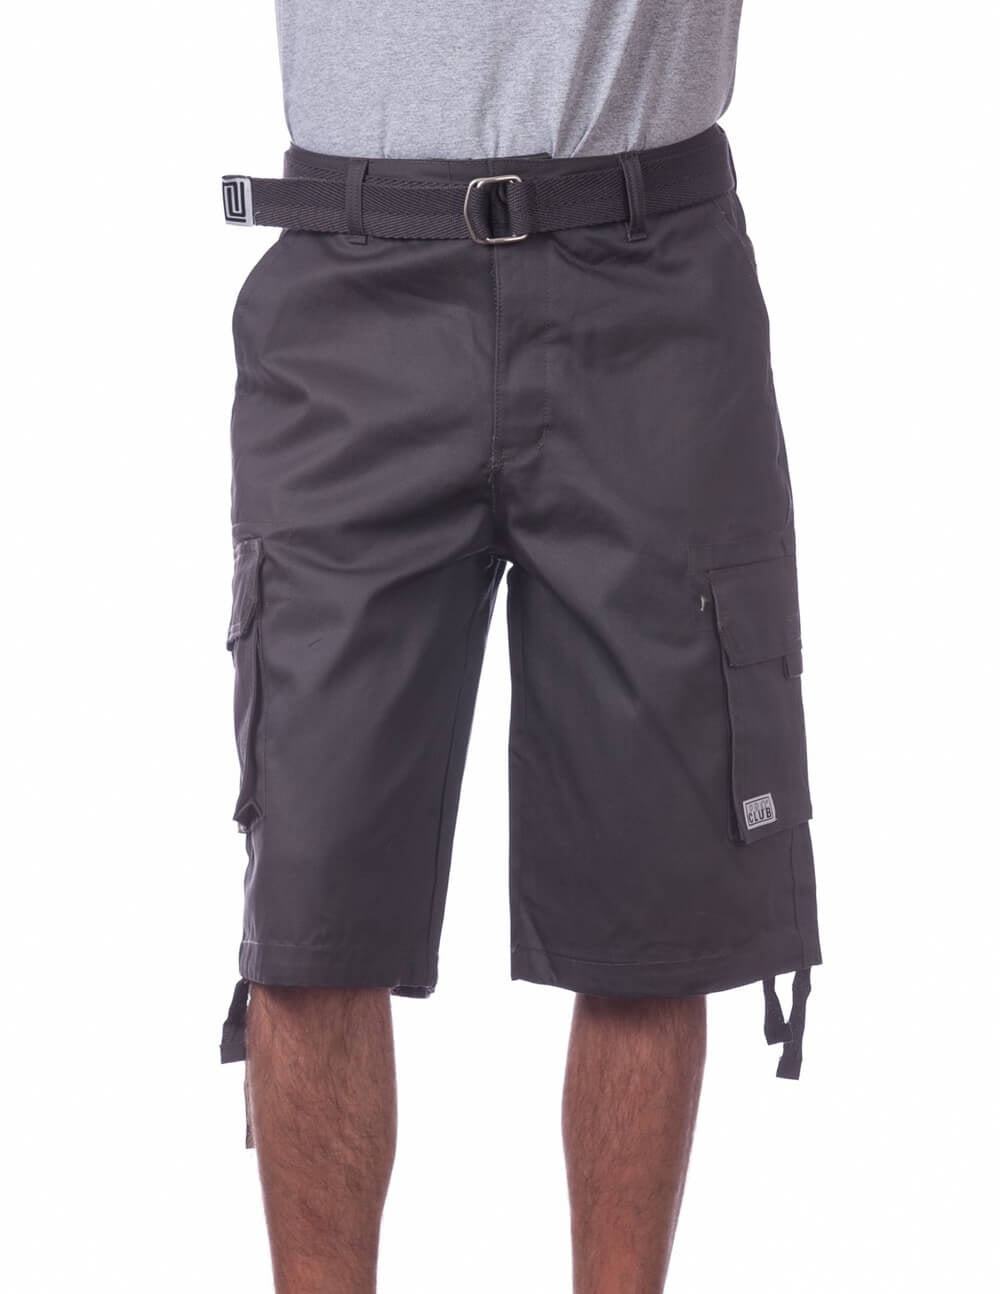 Pro Club Twill Cargo Shorts with Belt - CHARCOAL